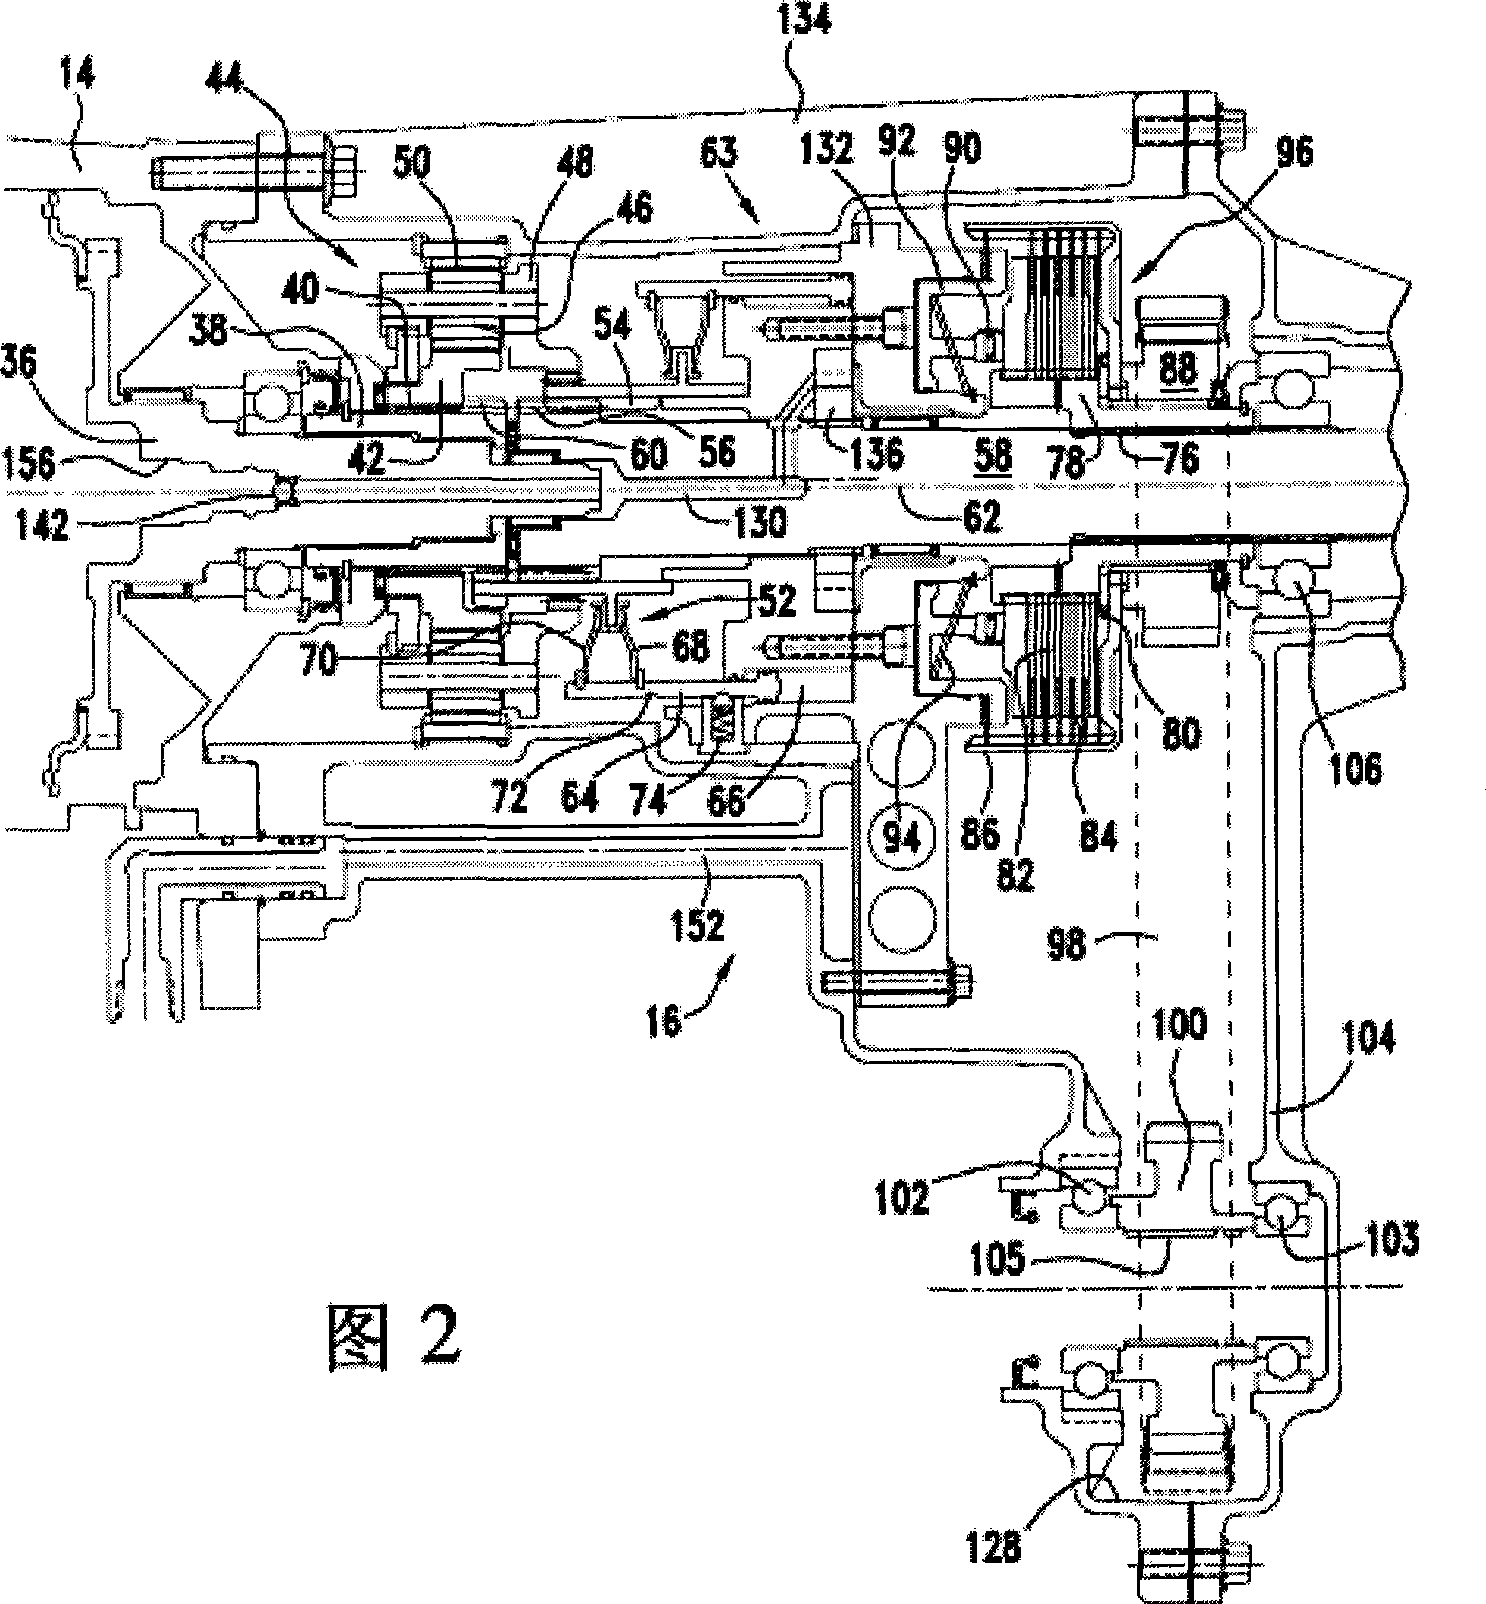 Transfer case for a motor vehicle powertrain